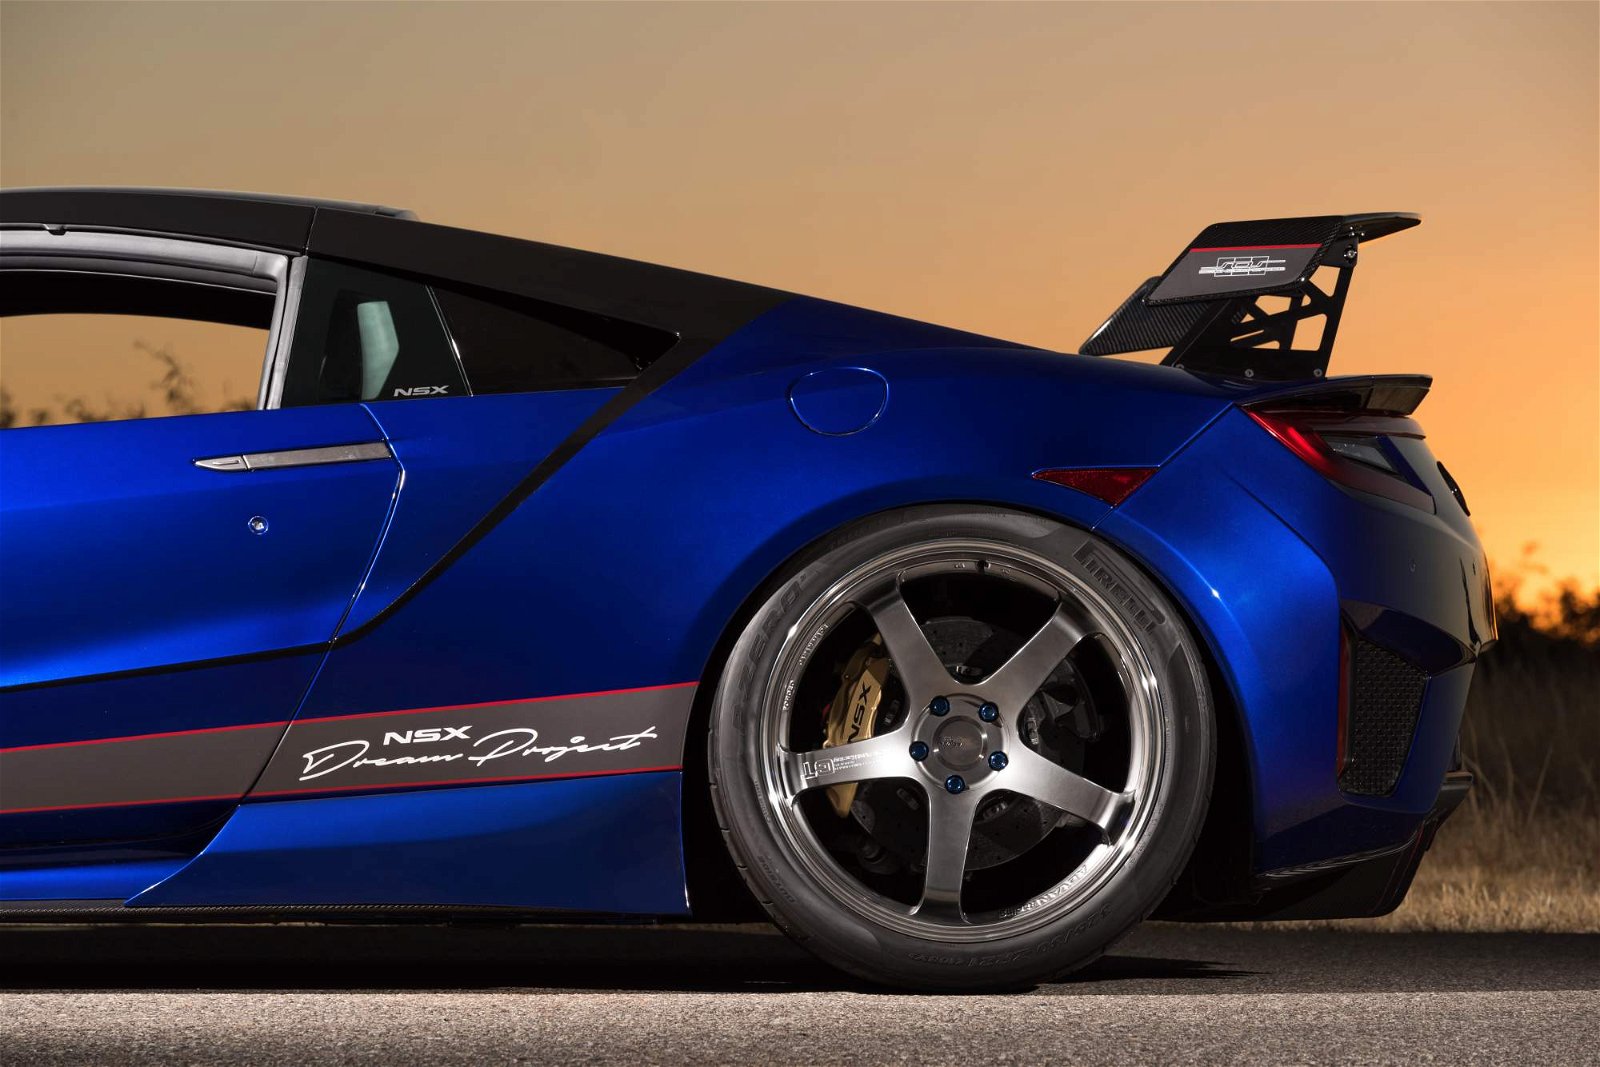 Acura-NSX-Dream-Project-by-ScienceofSpeed-8